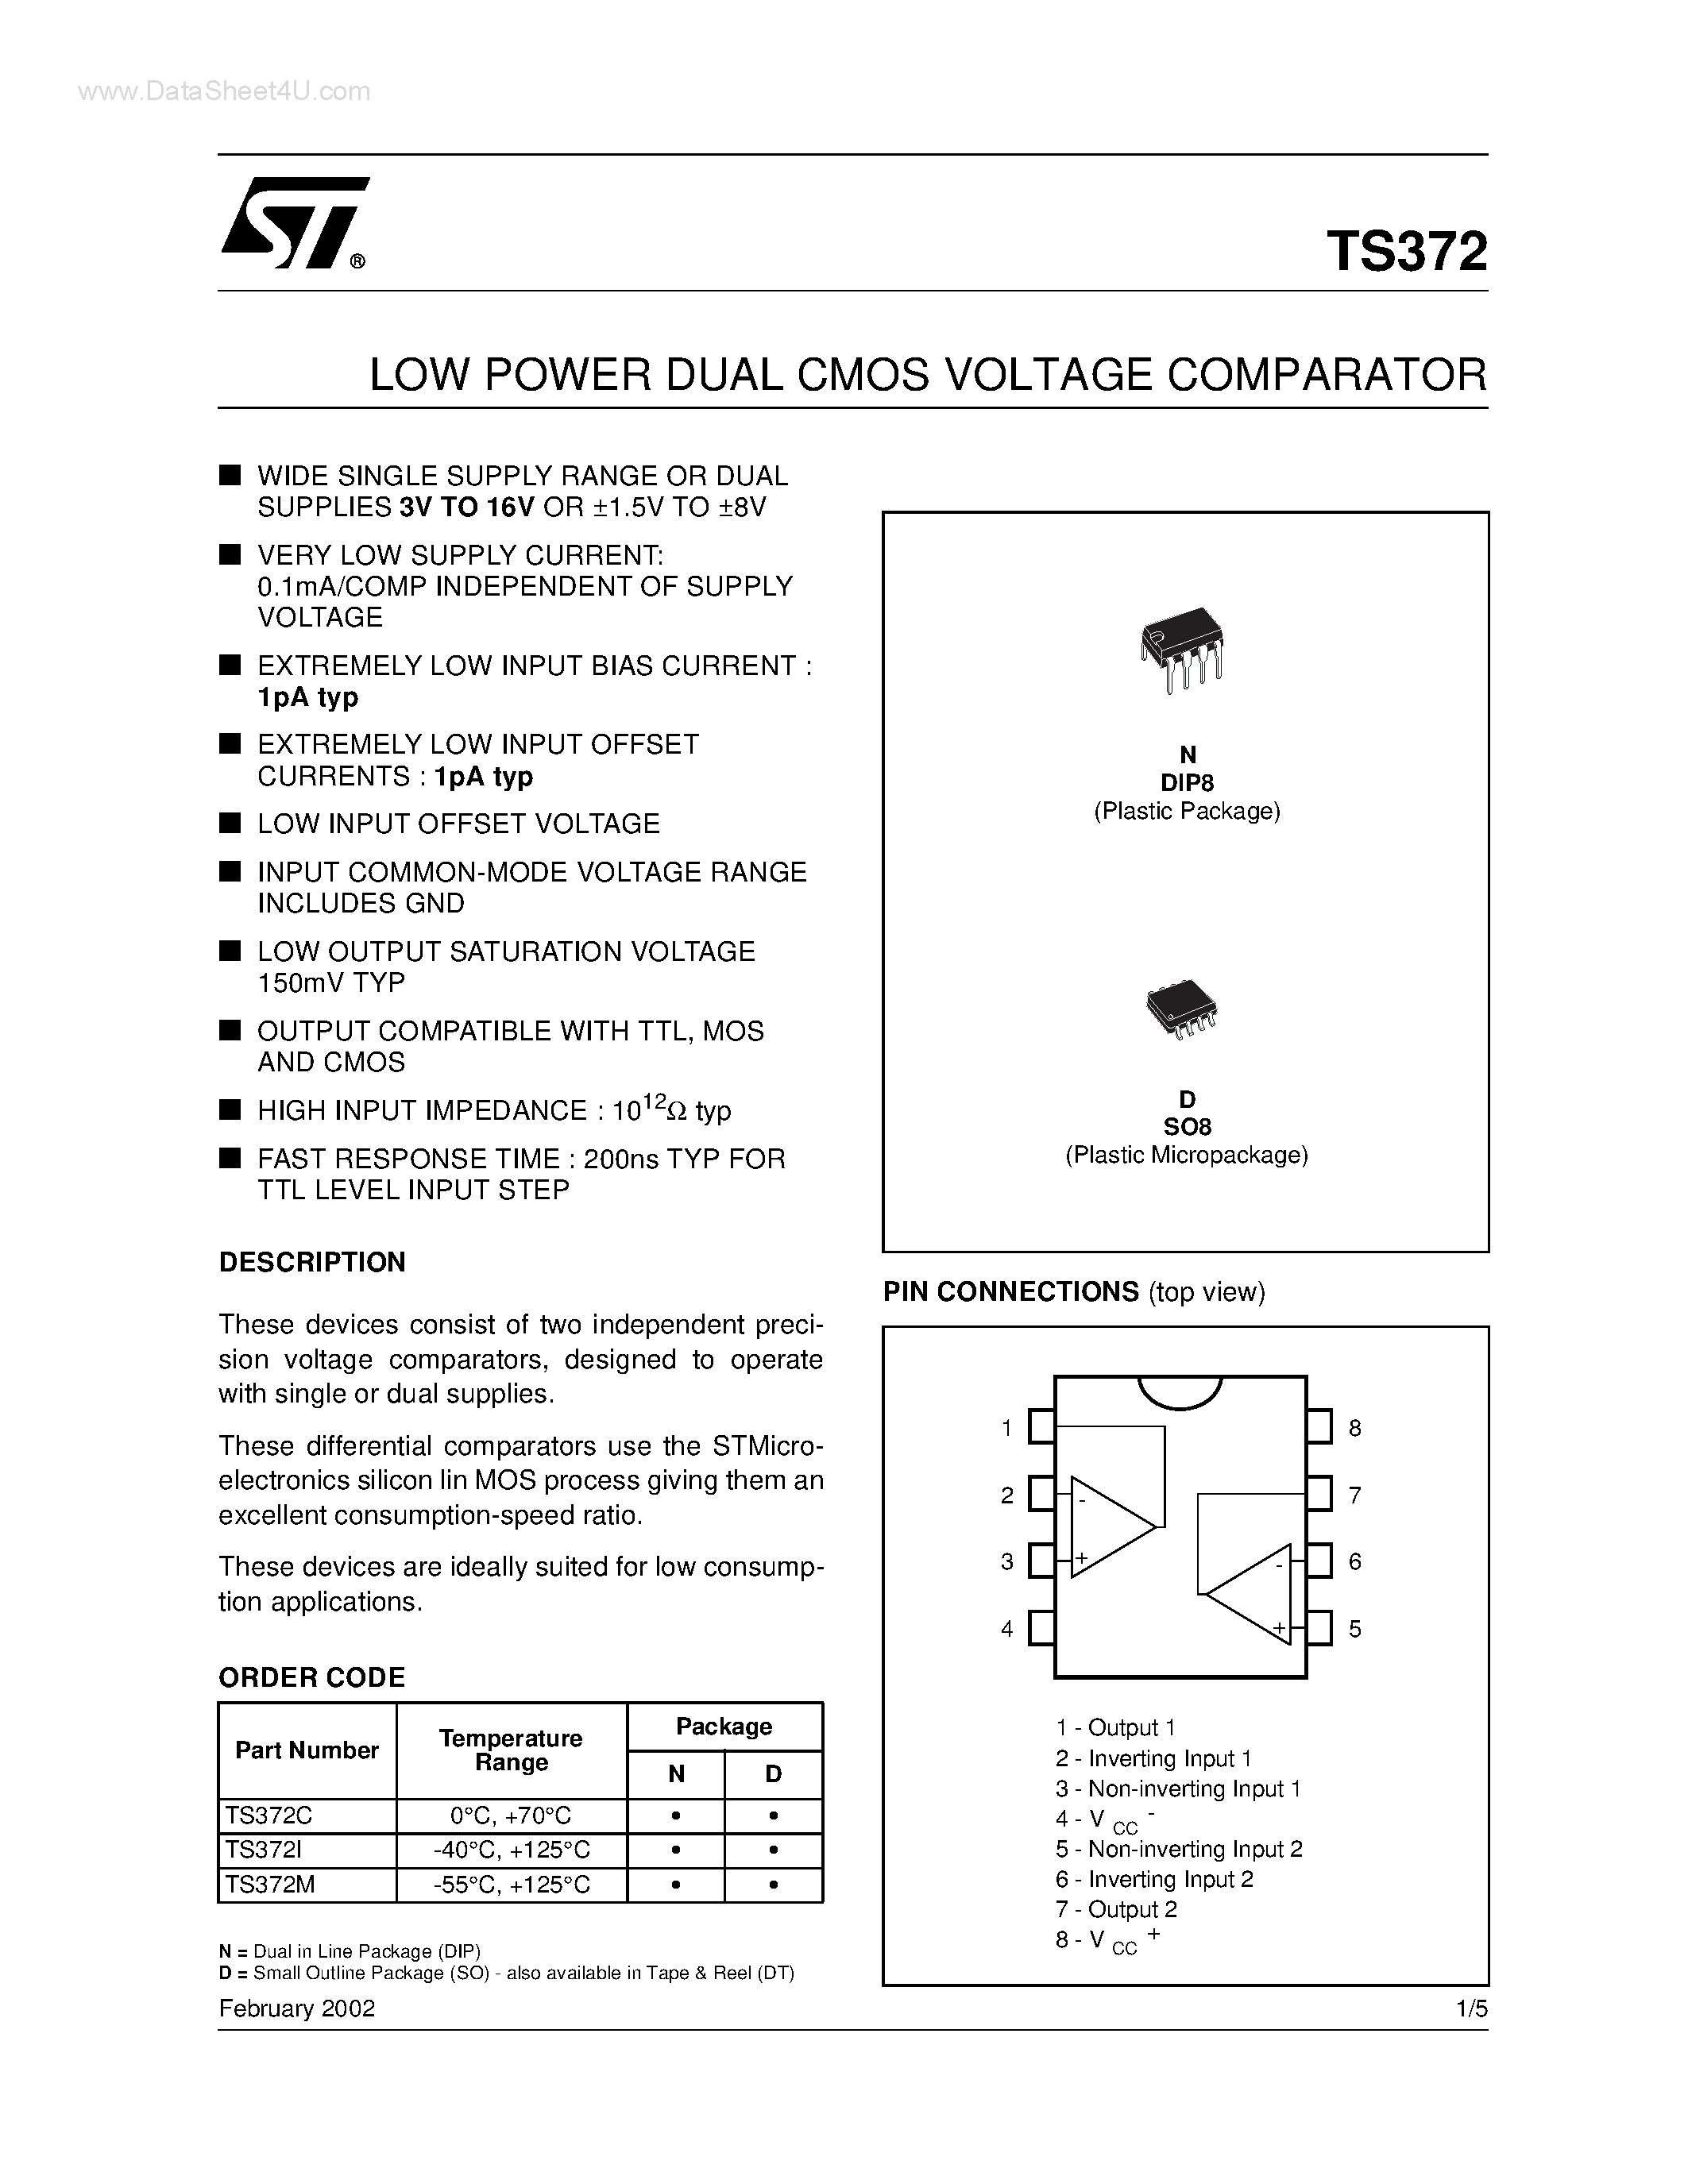 Datasheet TS372 - LOW POWER DUAL CMOS VOLTAGE COMPARATOR page 1